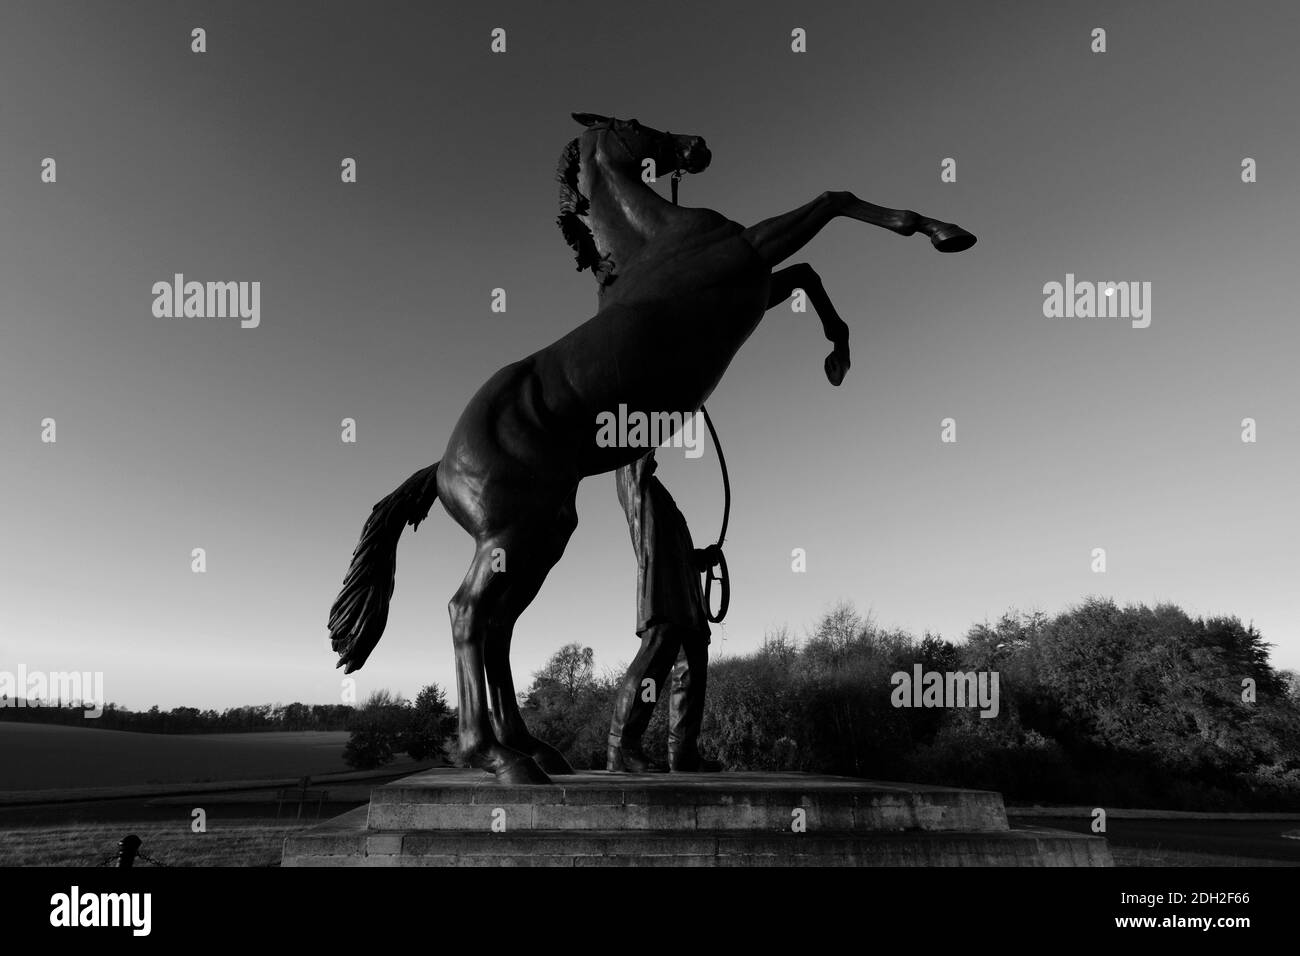 Sunrise over the Newmarket Stallion statue by Marcia Astor and Allan Sly, at Newmarket racecourse, Suffolk, England, UK Stock Photo